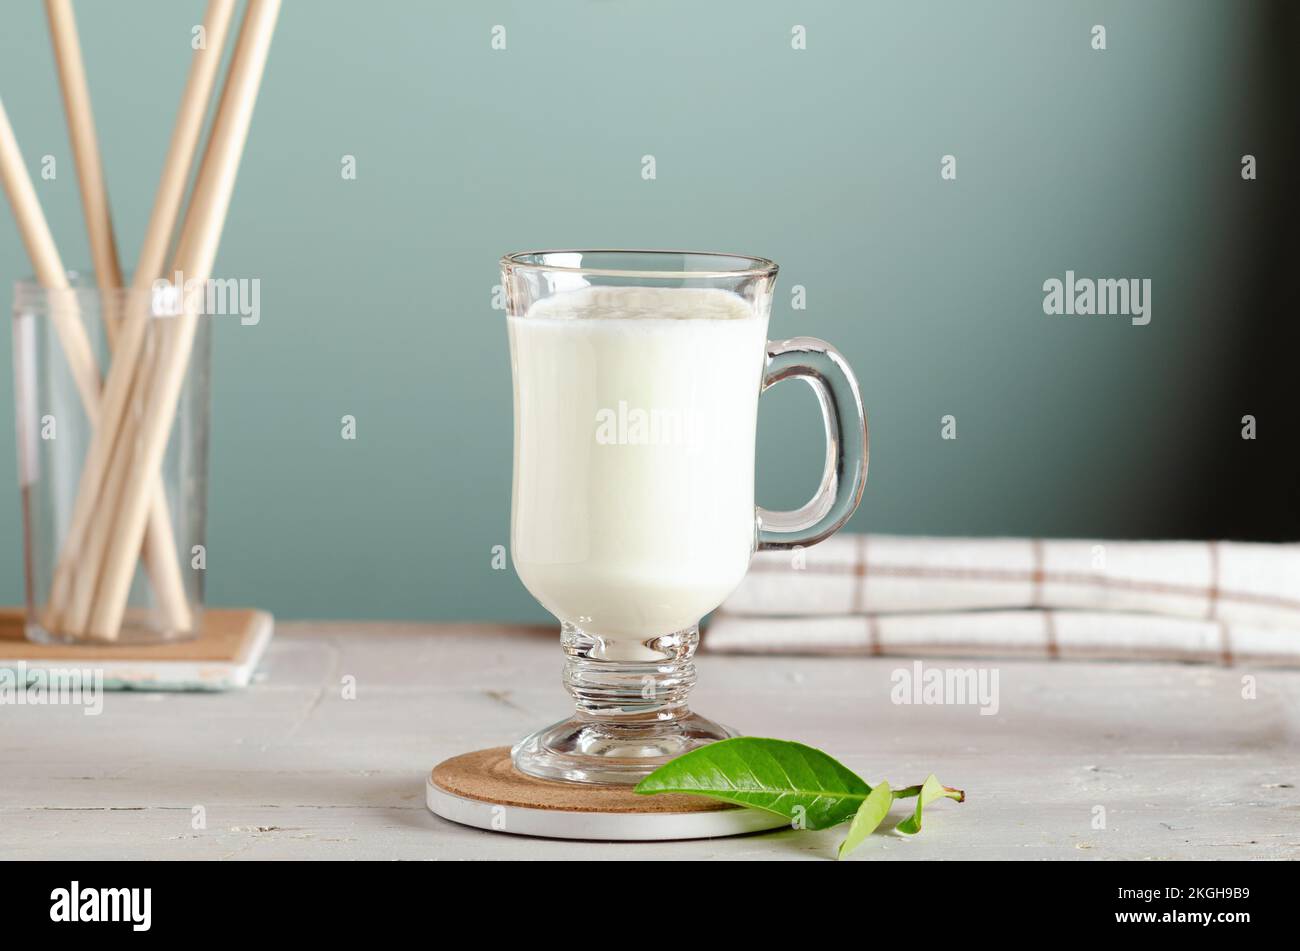 Kefir, fermented milk drink or yogurt in a glass on white wooden background. Stock Photo